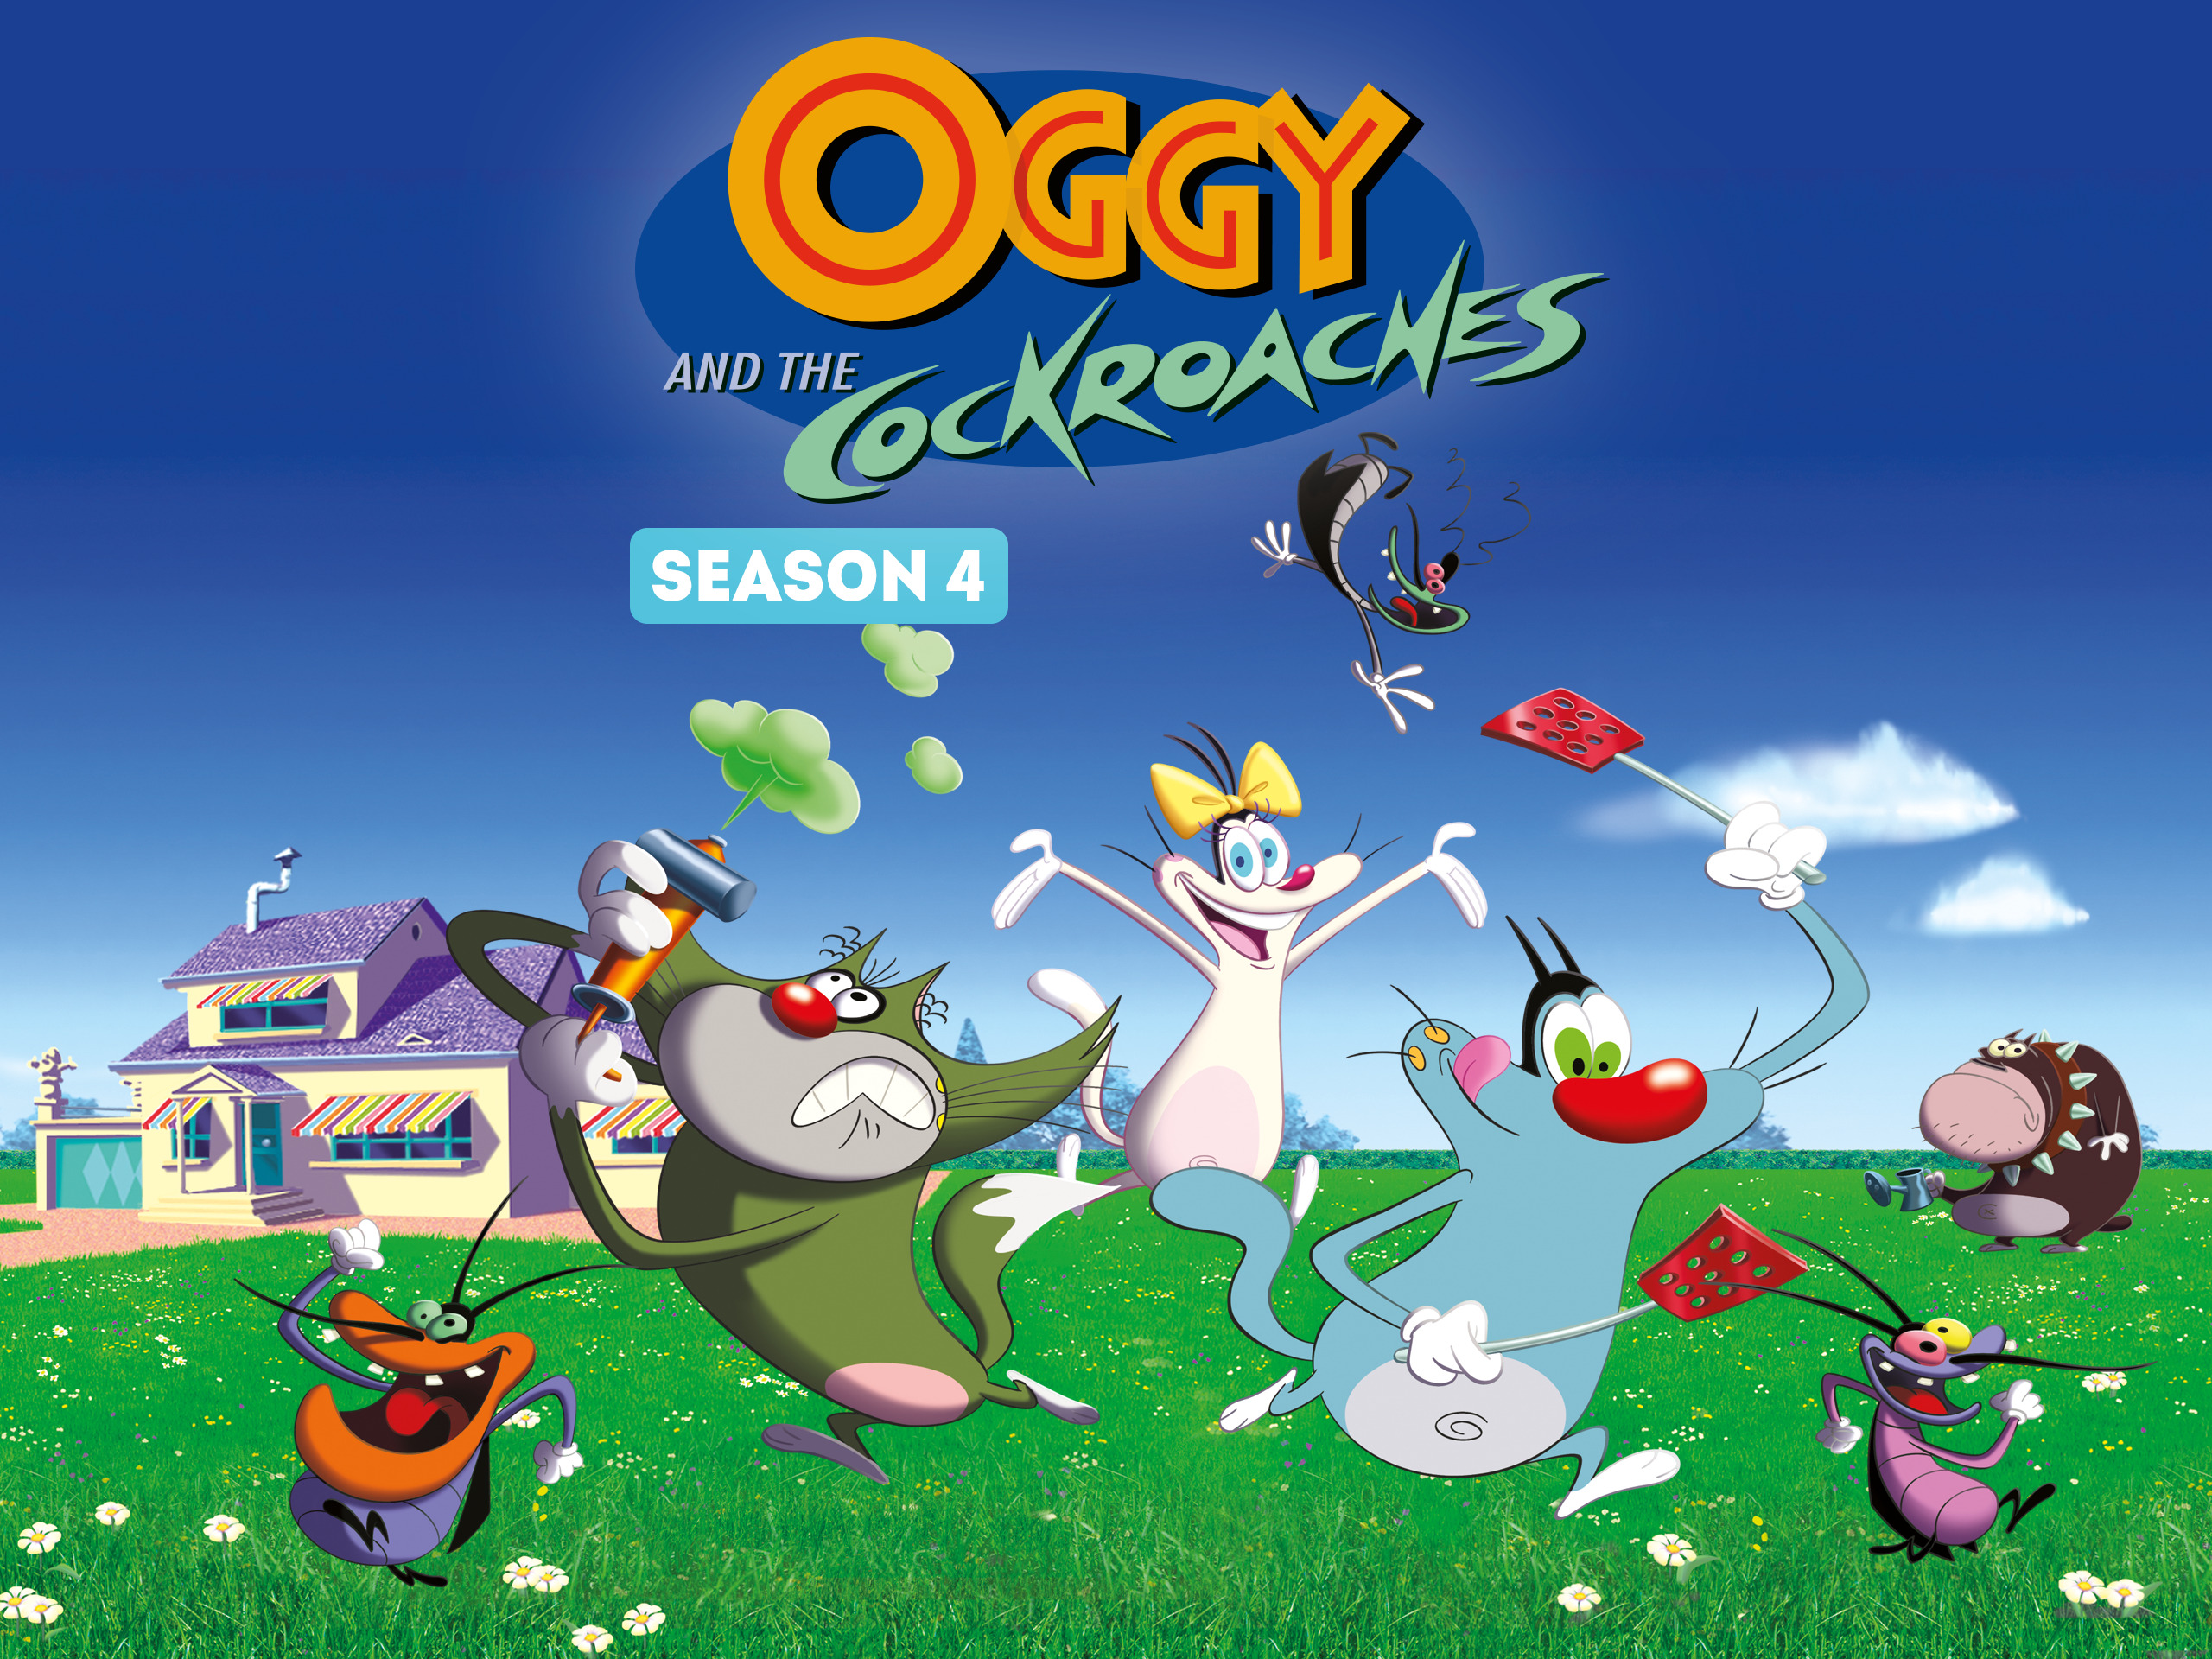 oggy and cockrochas